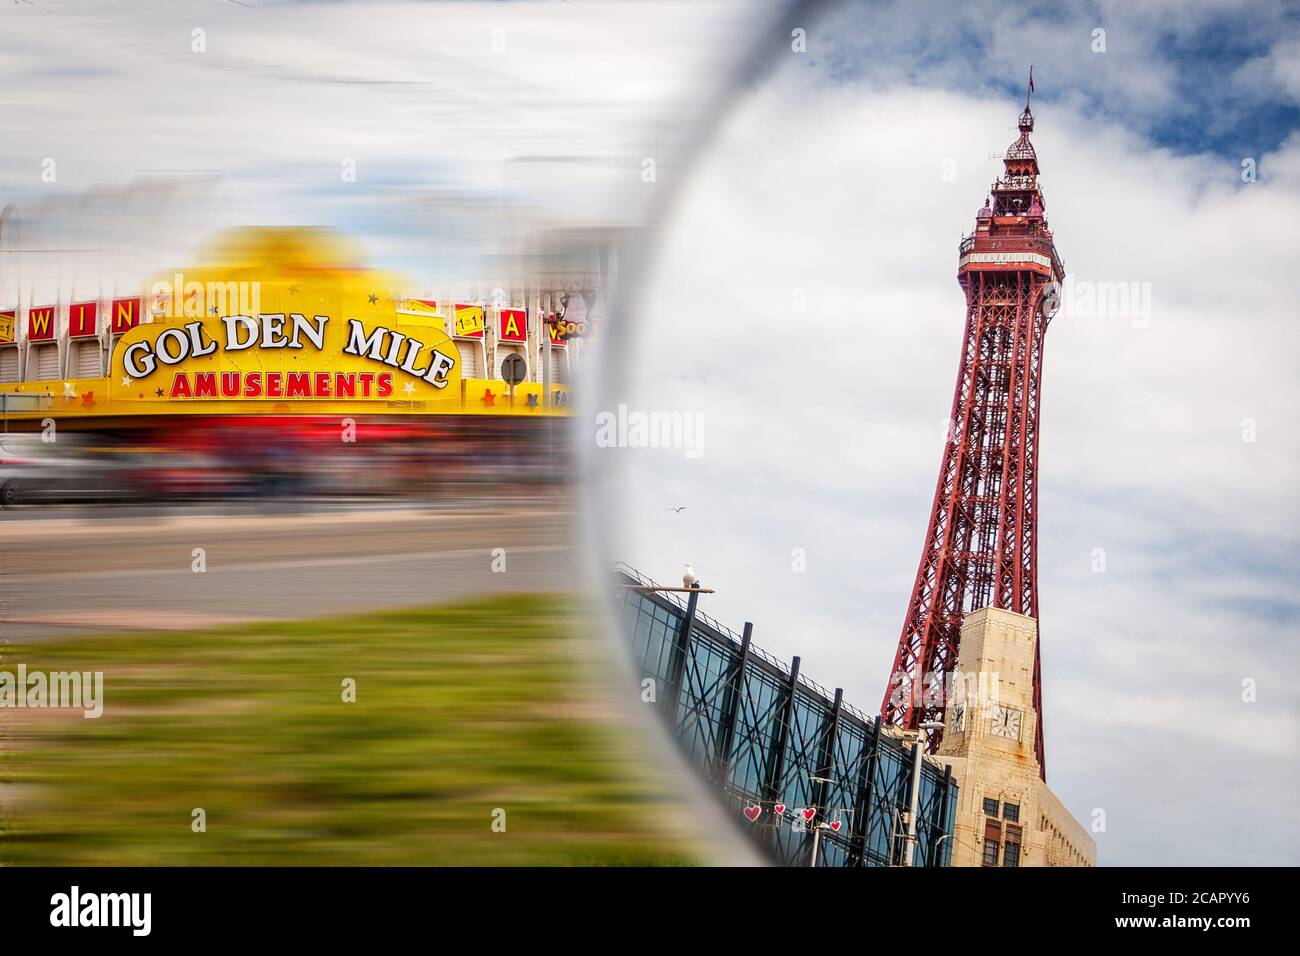 The World famous Blackpool tower seen through a mirror sat on the golden mile. Stock Photo